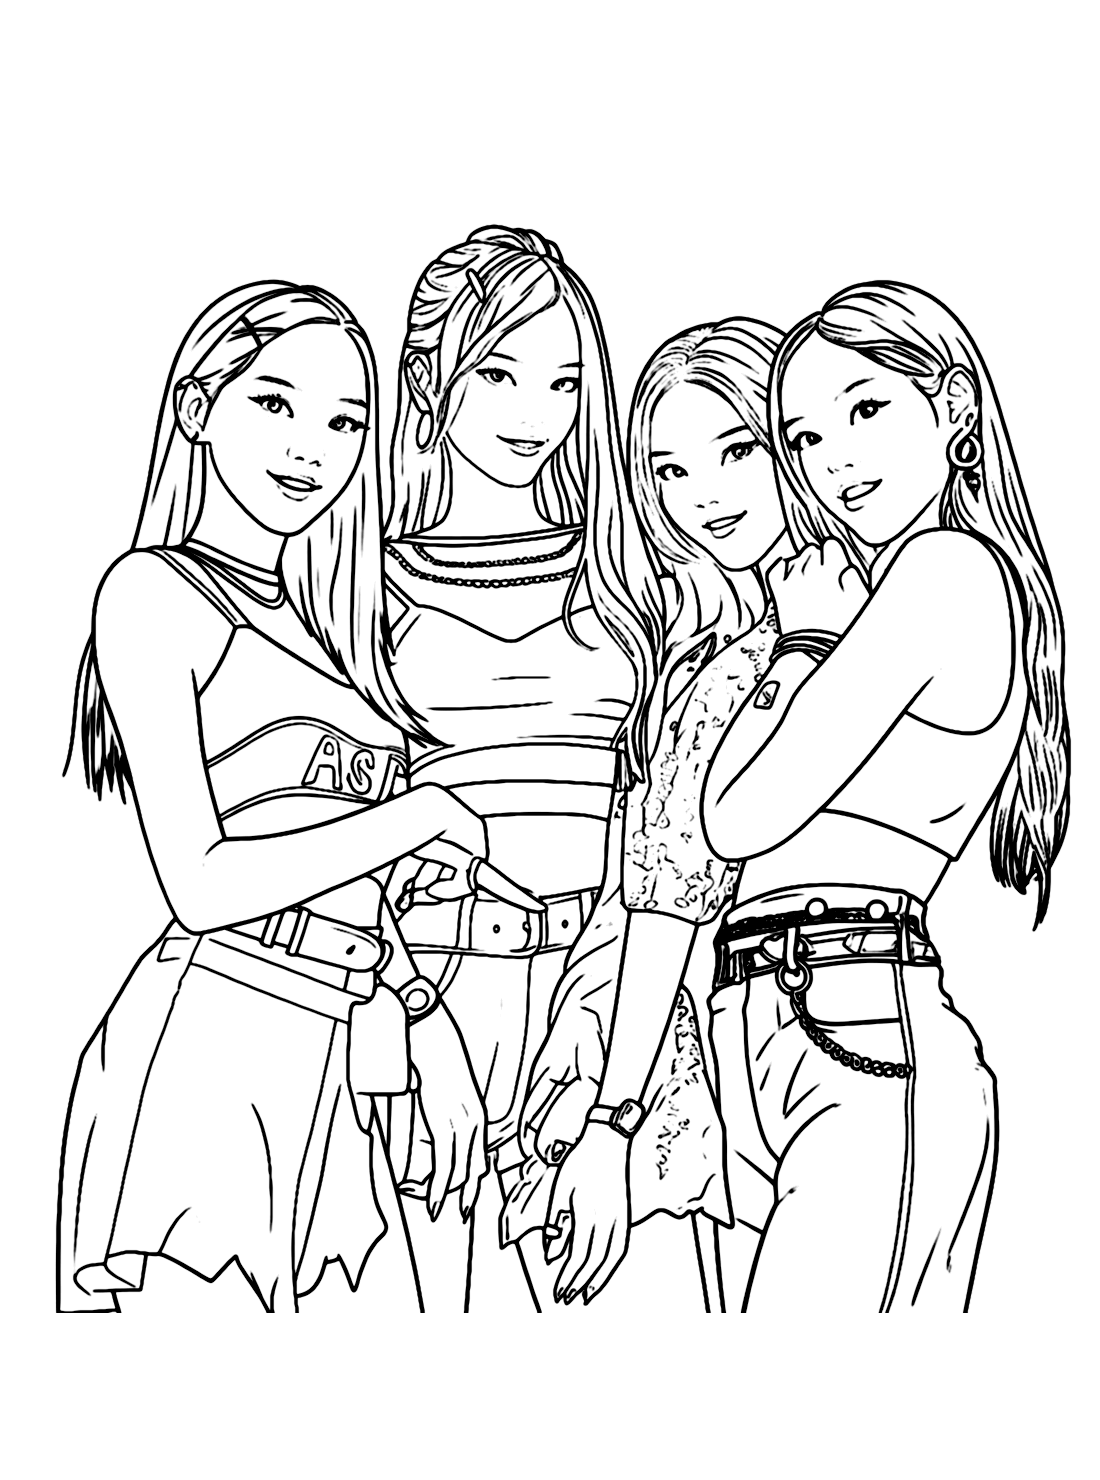 Blackpink coloring pages to print